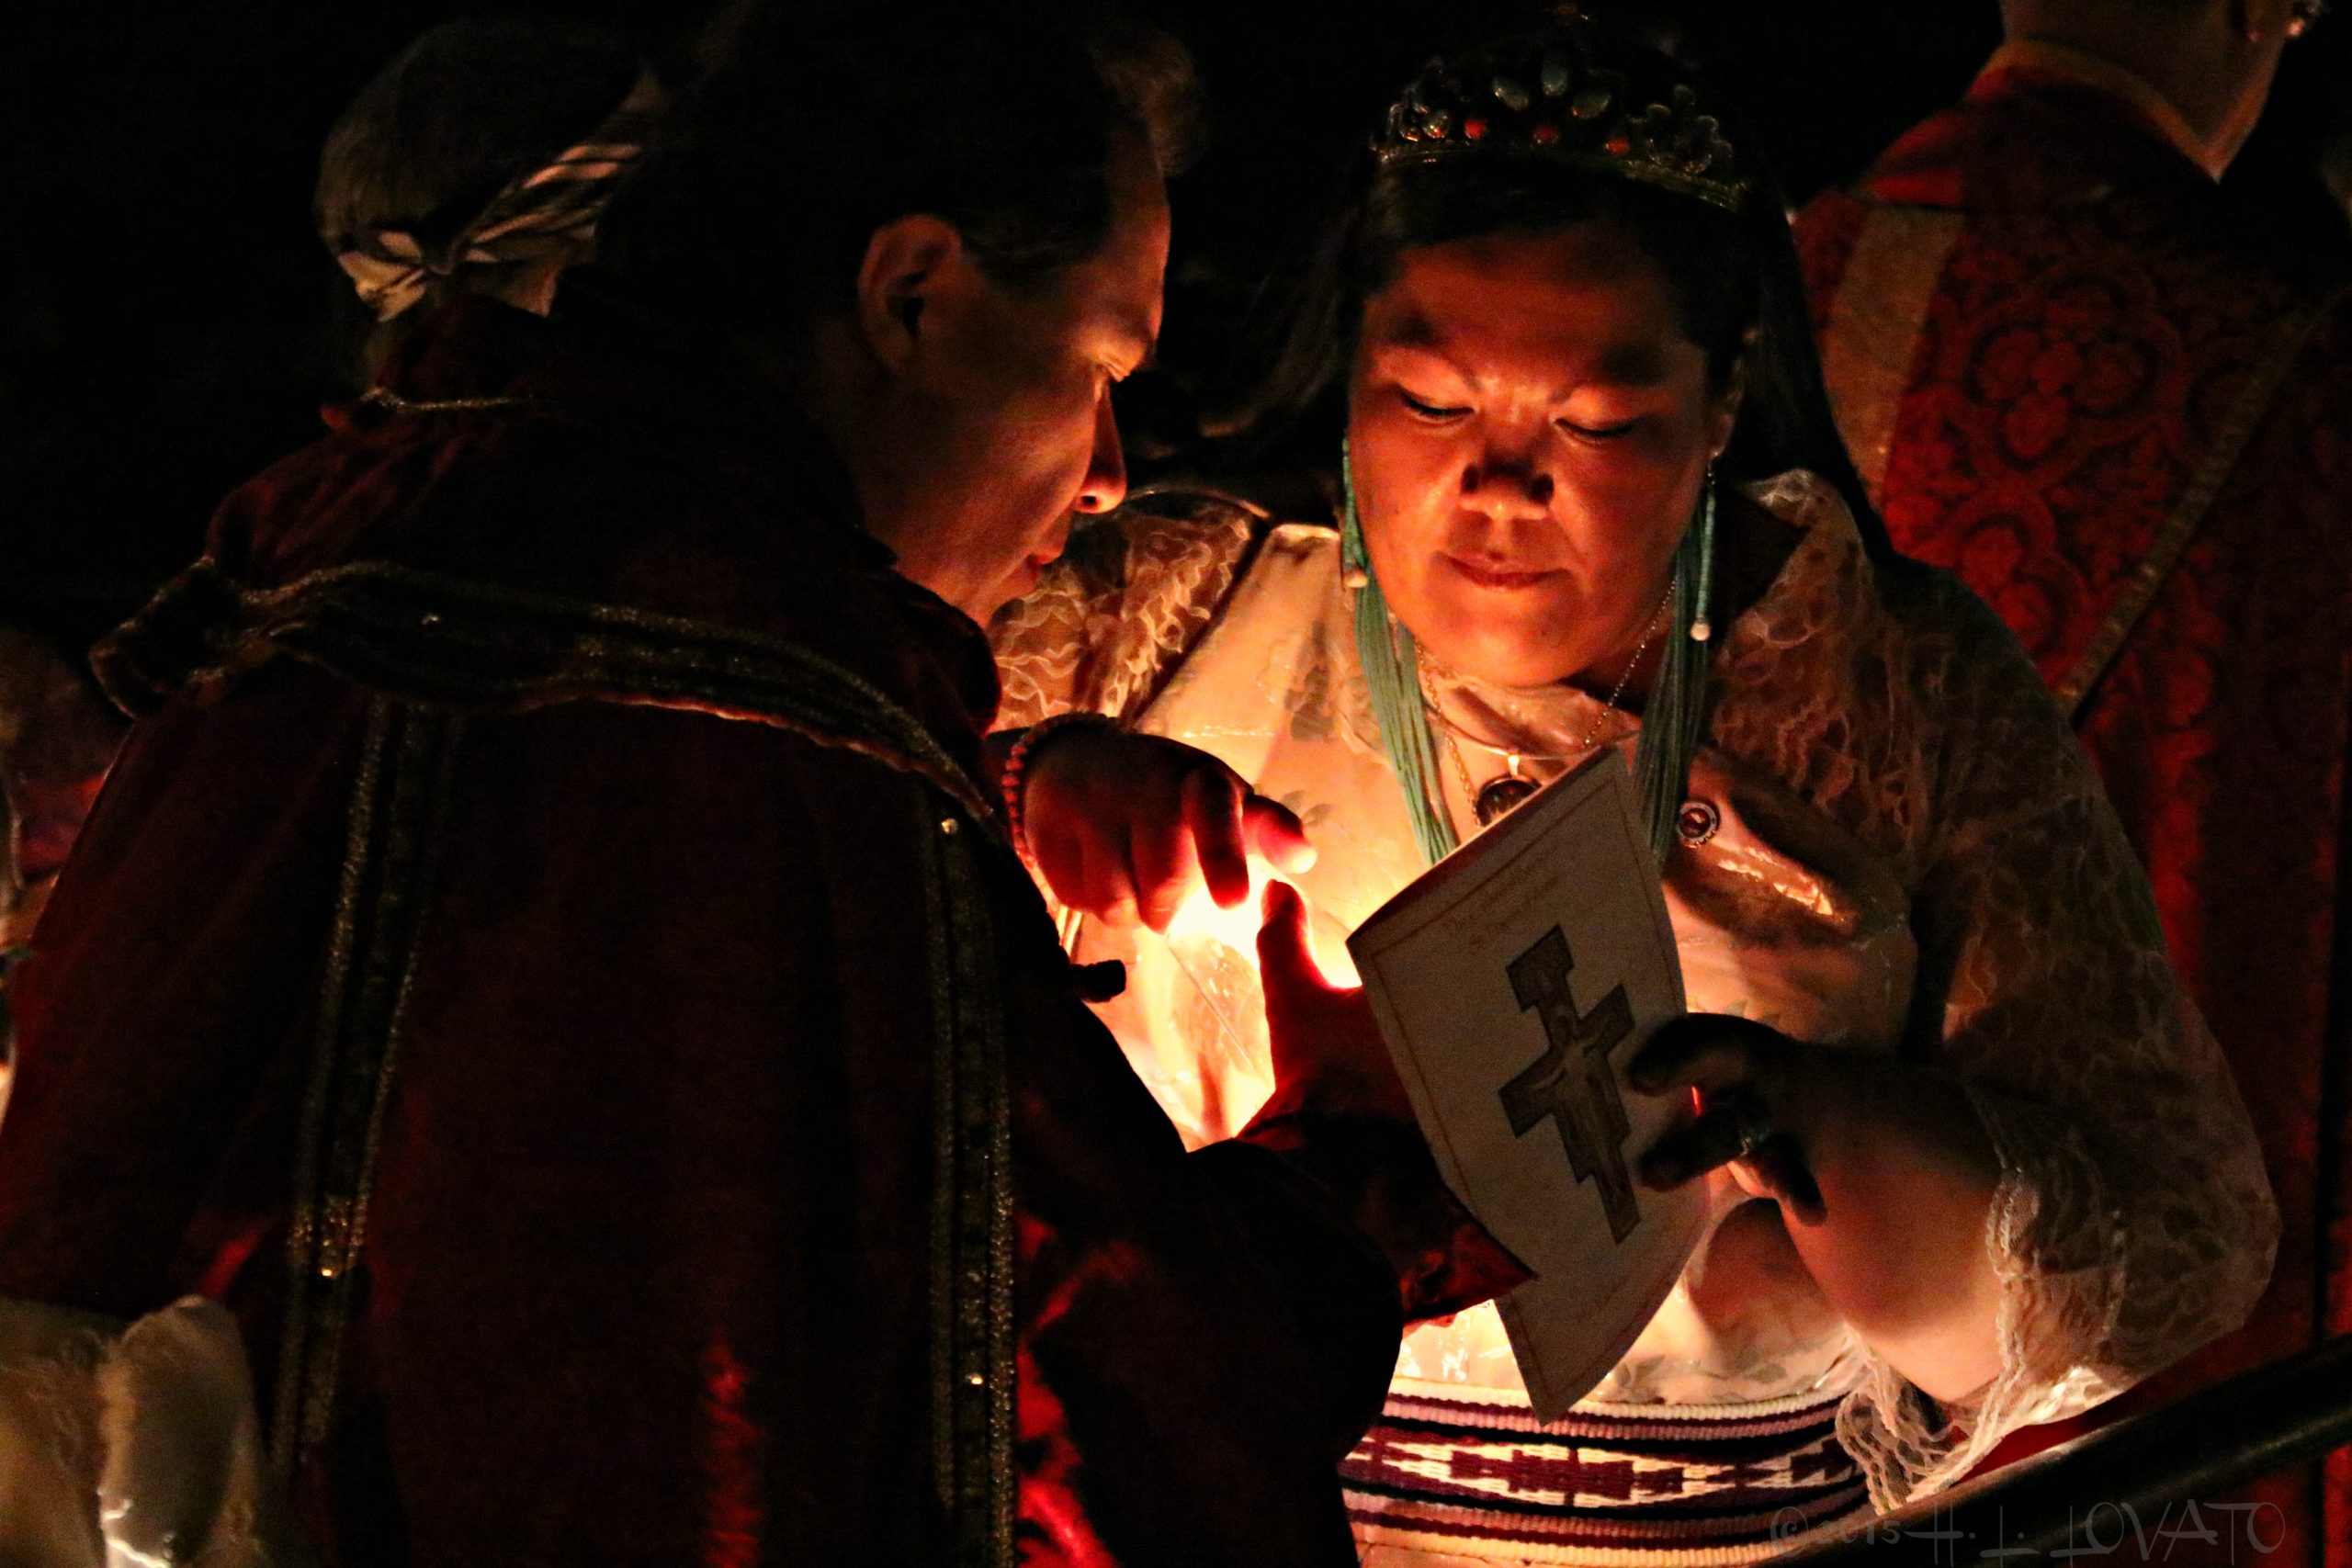 Man and woman lighting a candle